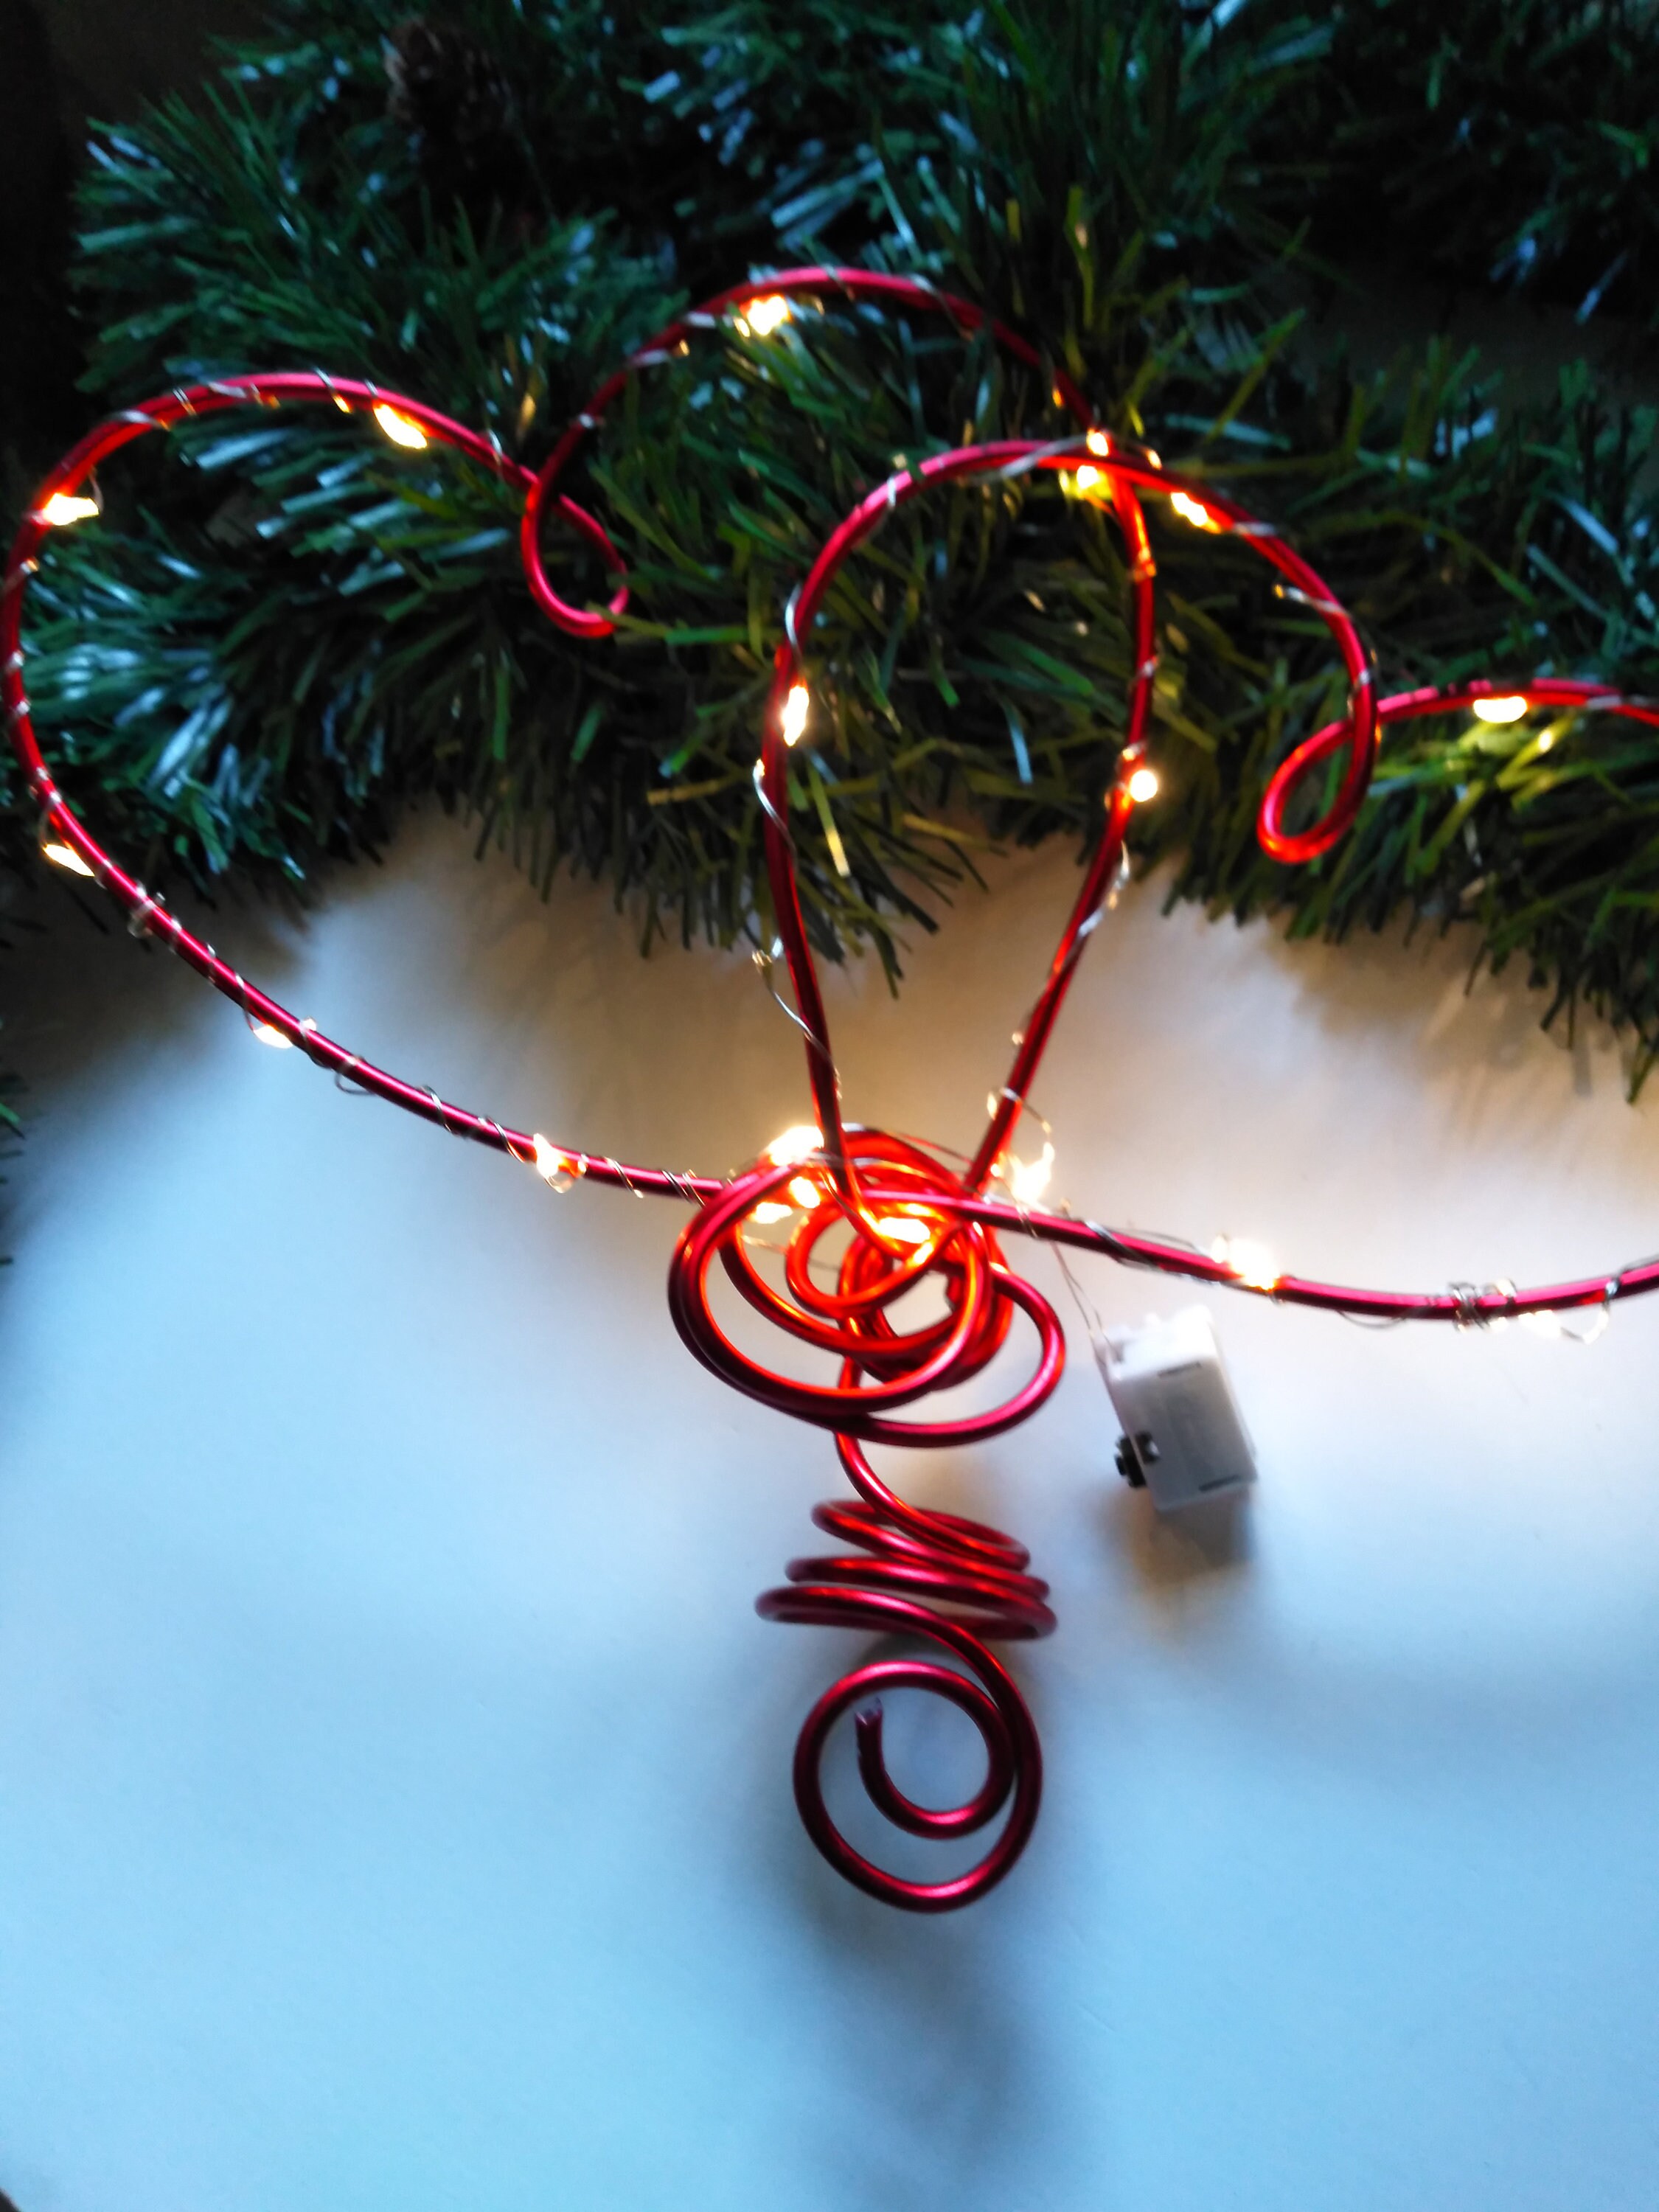 Mini Tree Topper Intertwined Hearts For Small Christmas And Valentine Trees